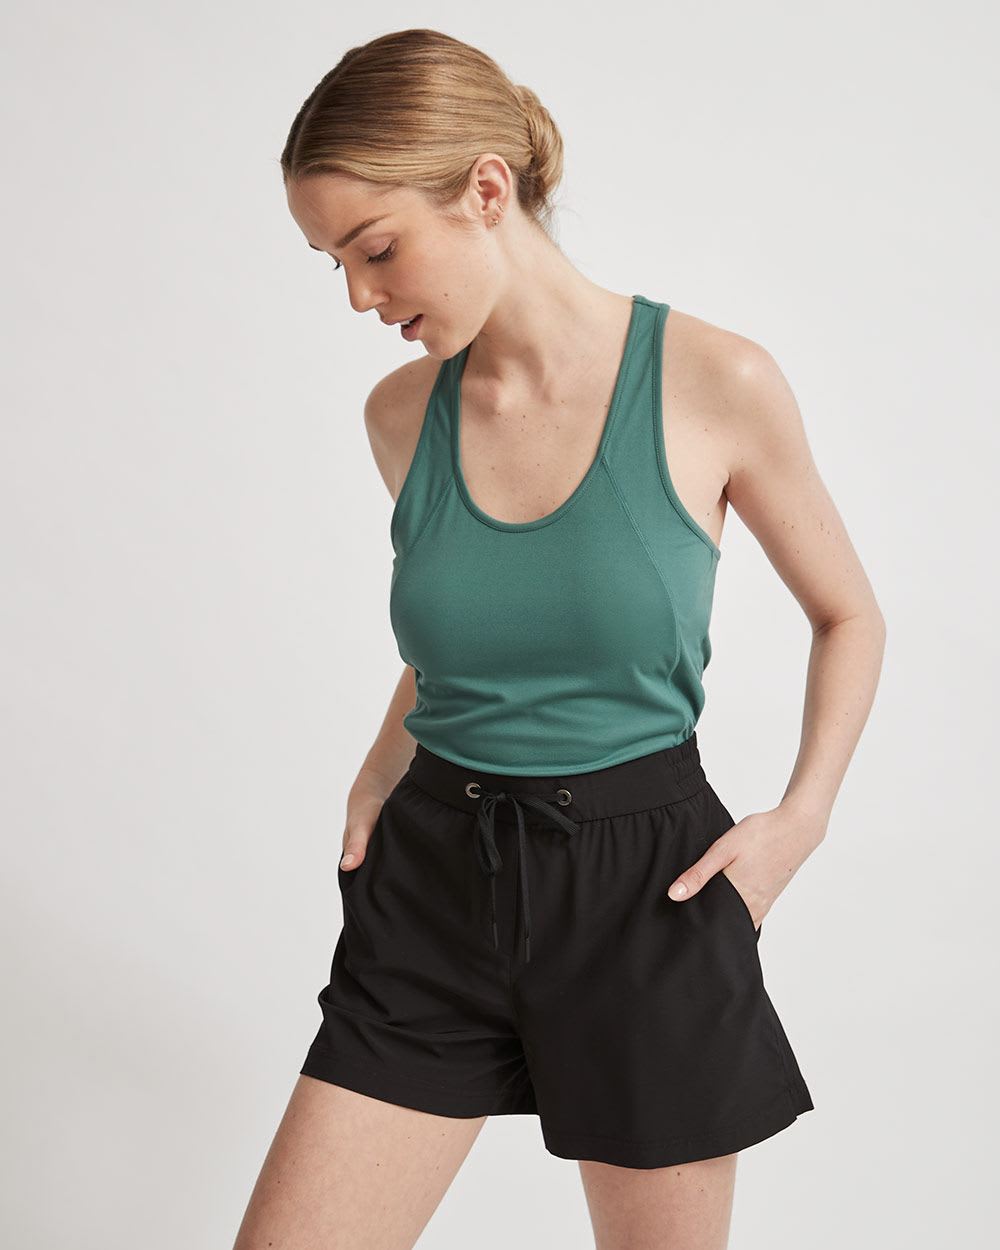 Athleisure Cami with Racer Back